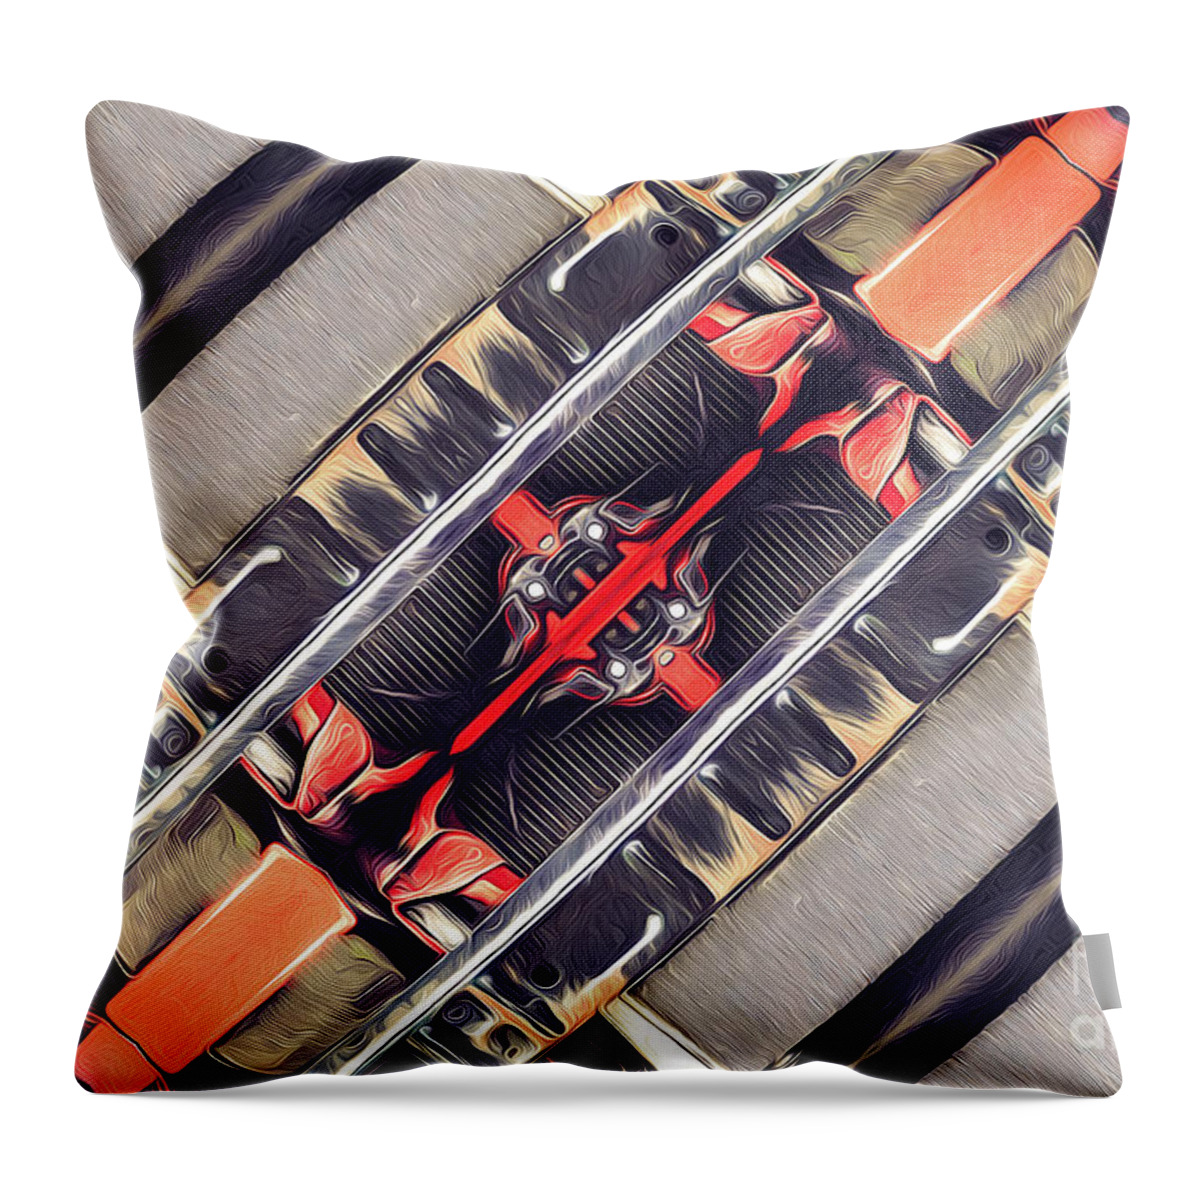 Geometric Throw Pillow featuring the digital art Abstract Geometric Automation by Phil Perkins